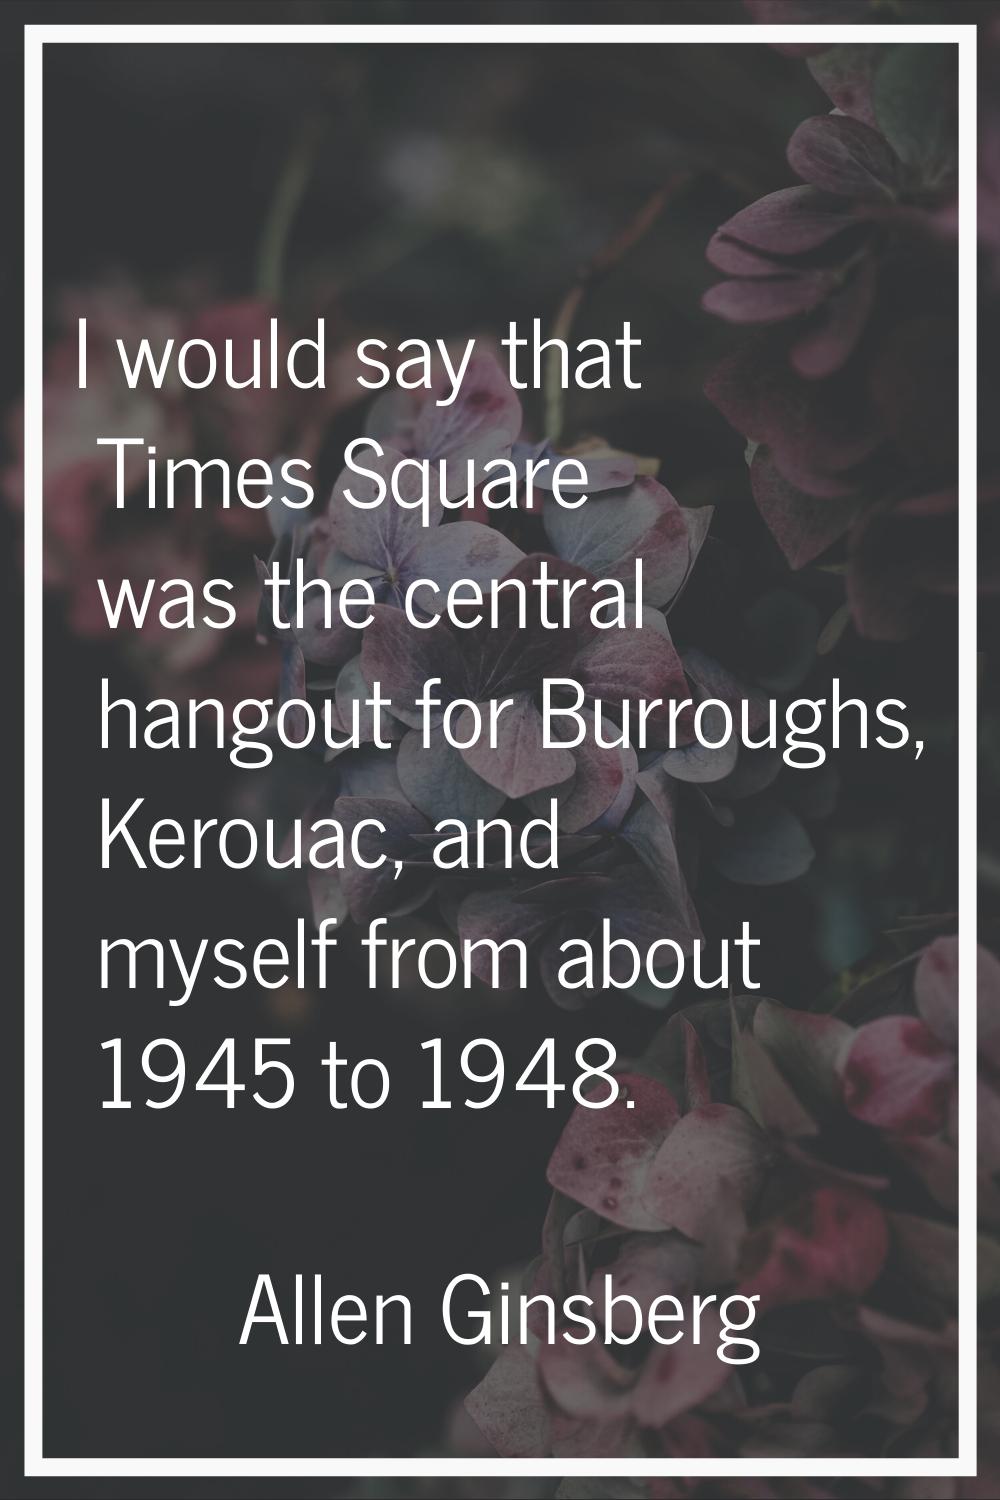 I would say that Times Square was the central hangout for Burroughs, Kerouac, and myself from about